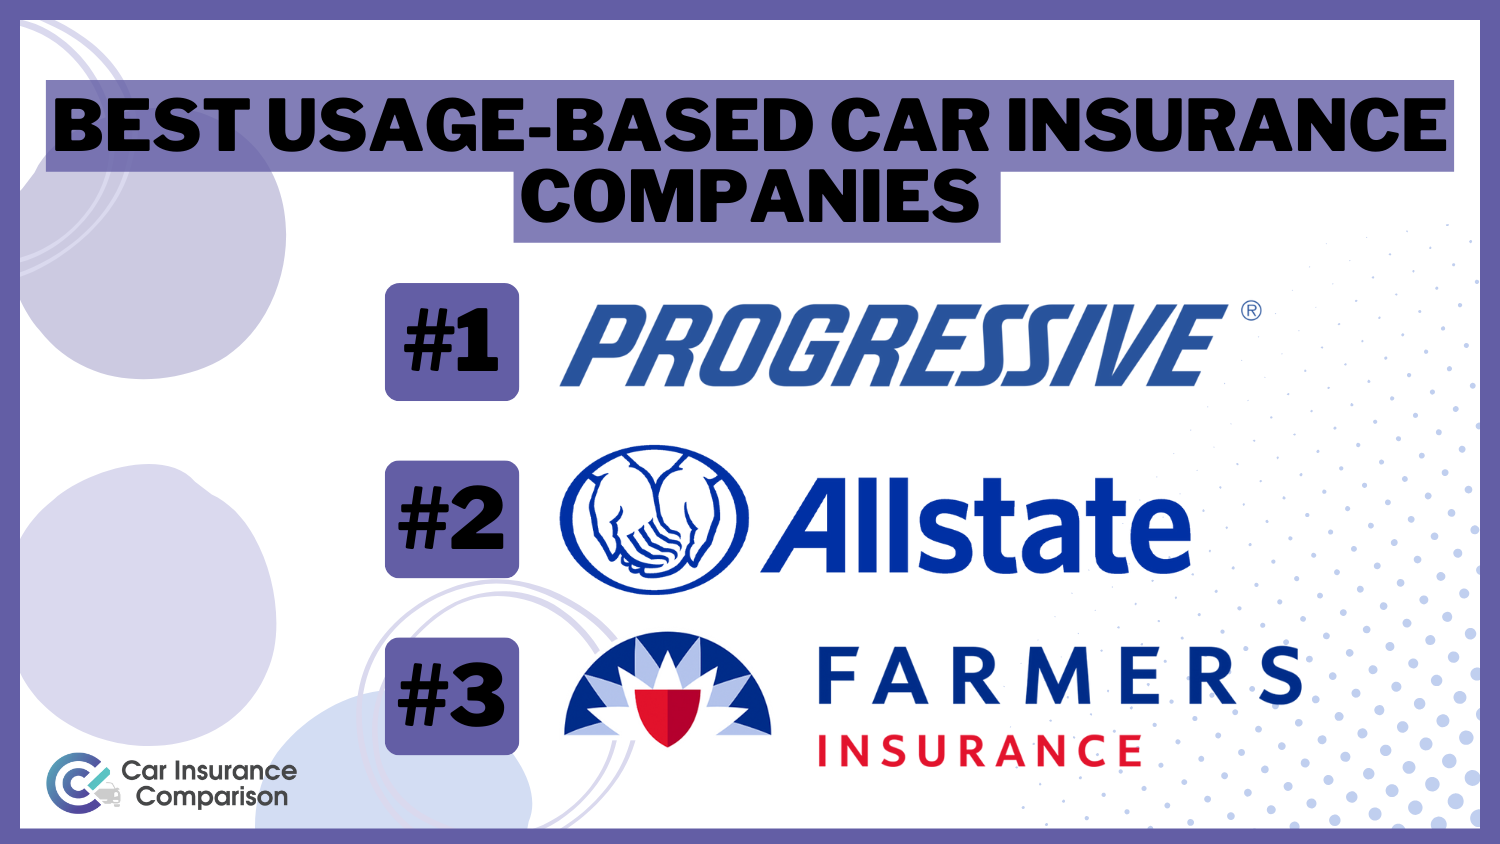 Best usage-based car insurance companies: Progressive, Allstate and Farmers Insurance